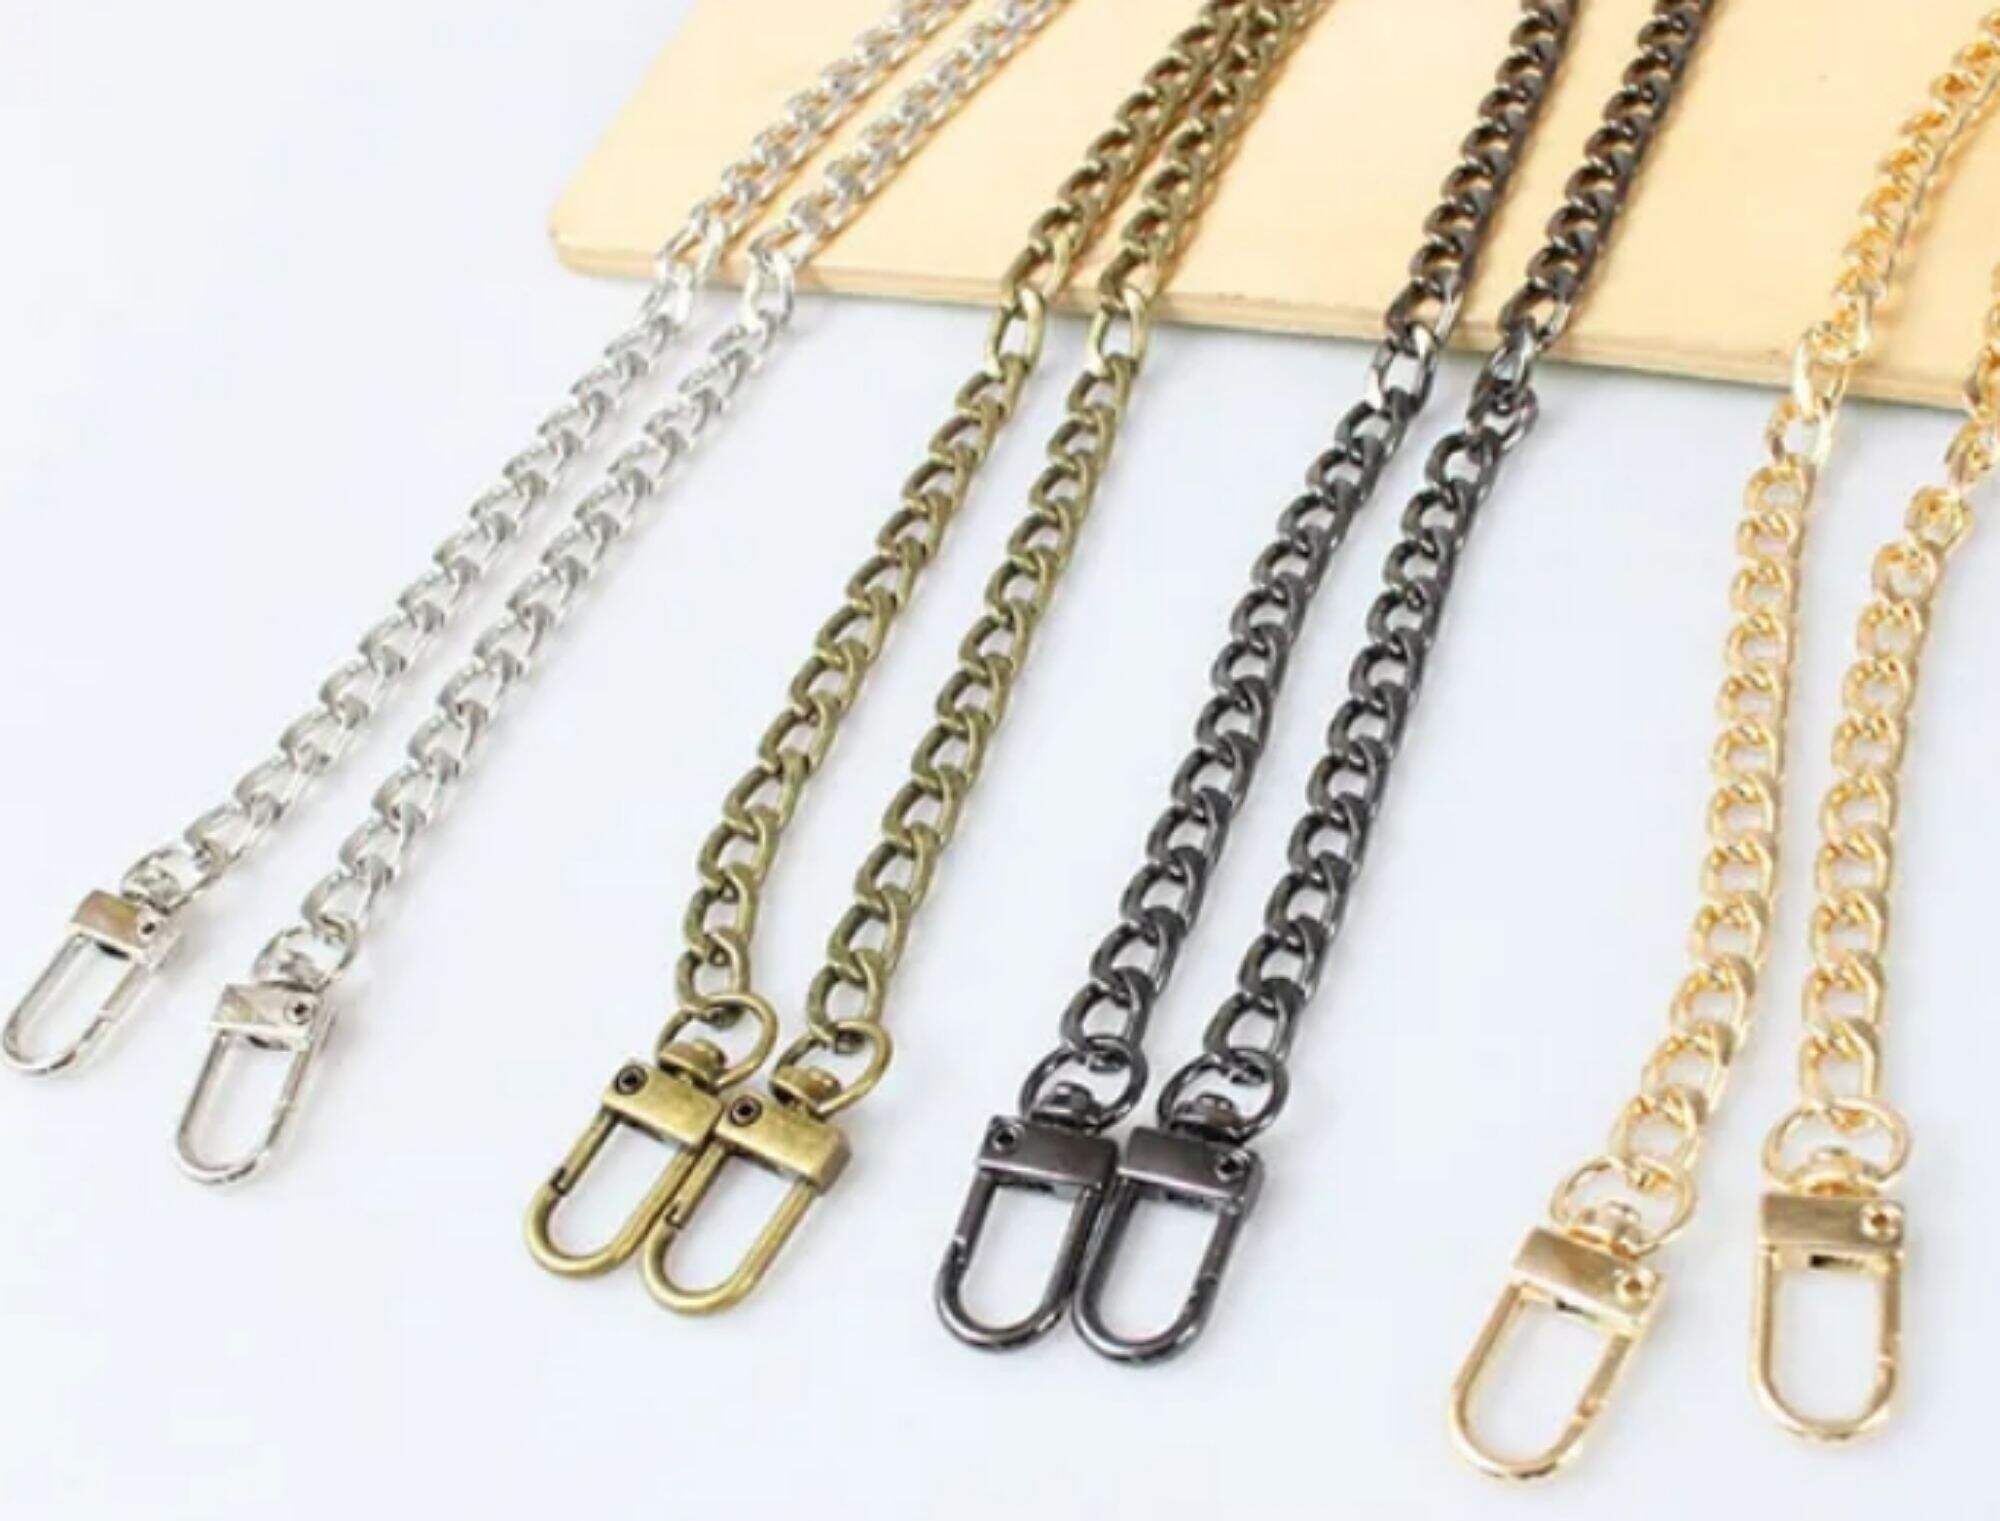 What is the appropriate length of bag chain